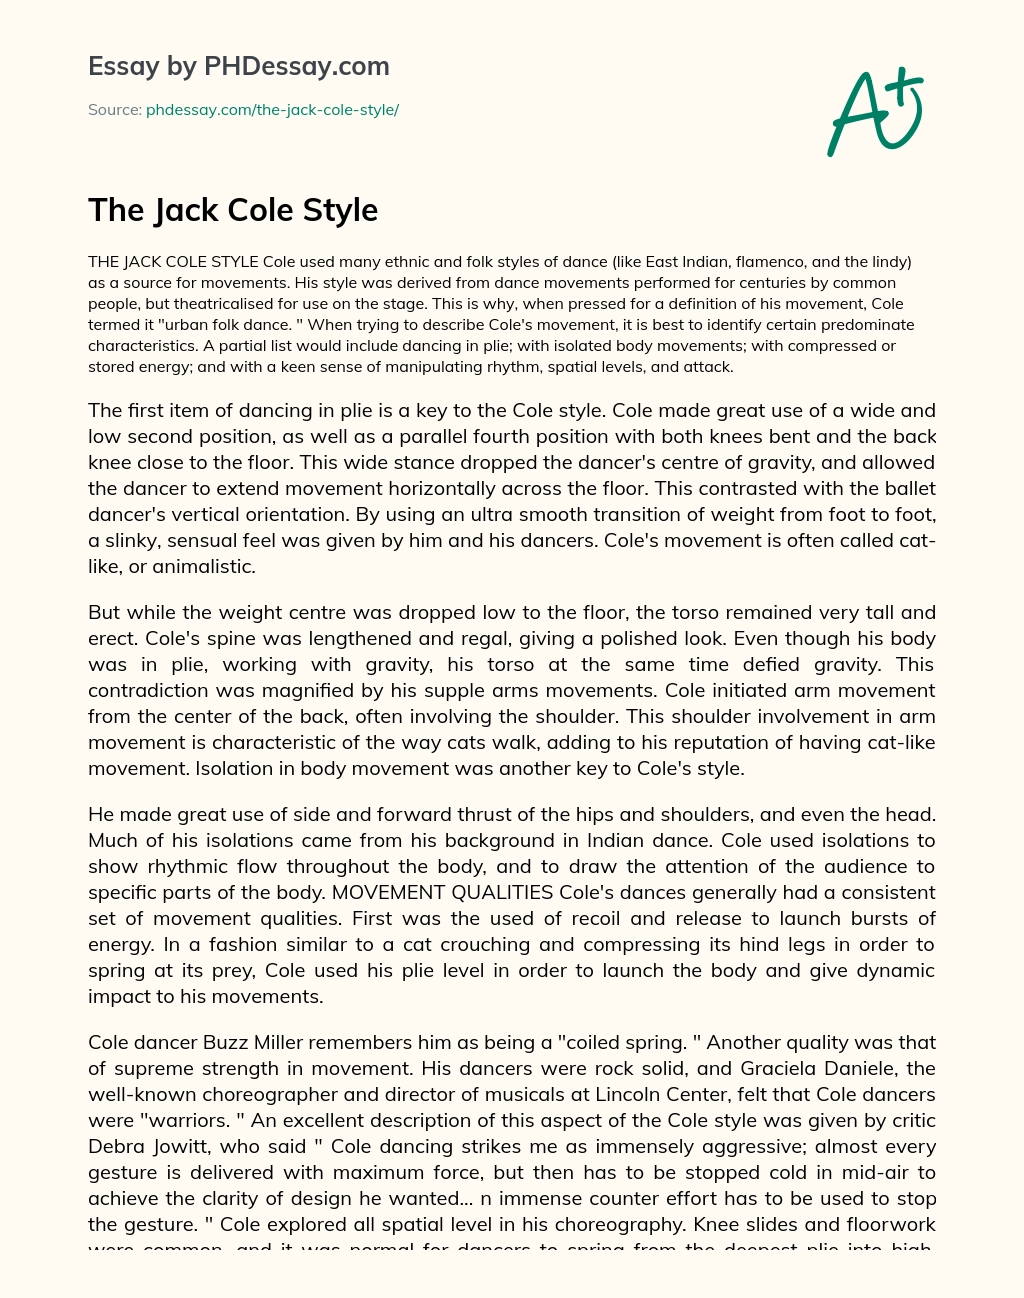 The Jack Cole Style essay